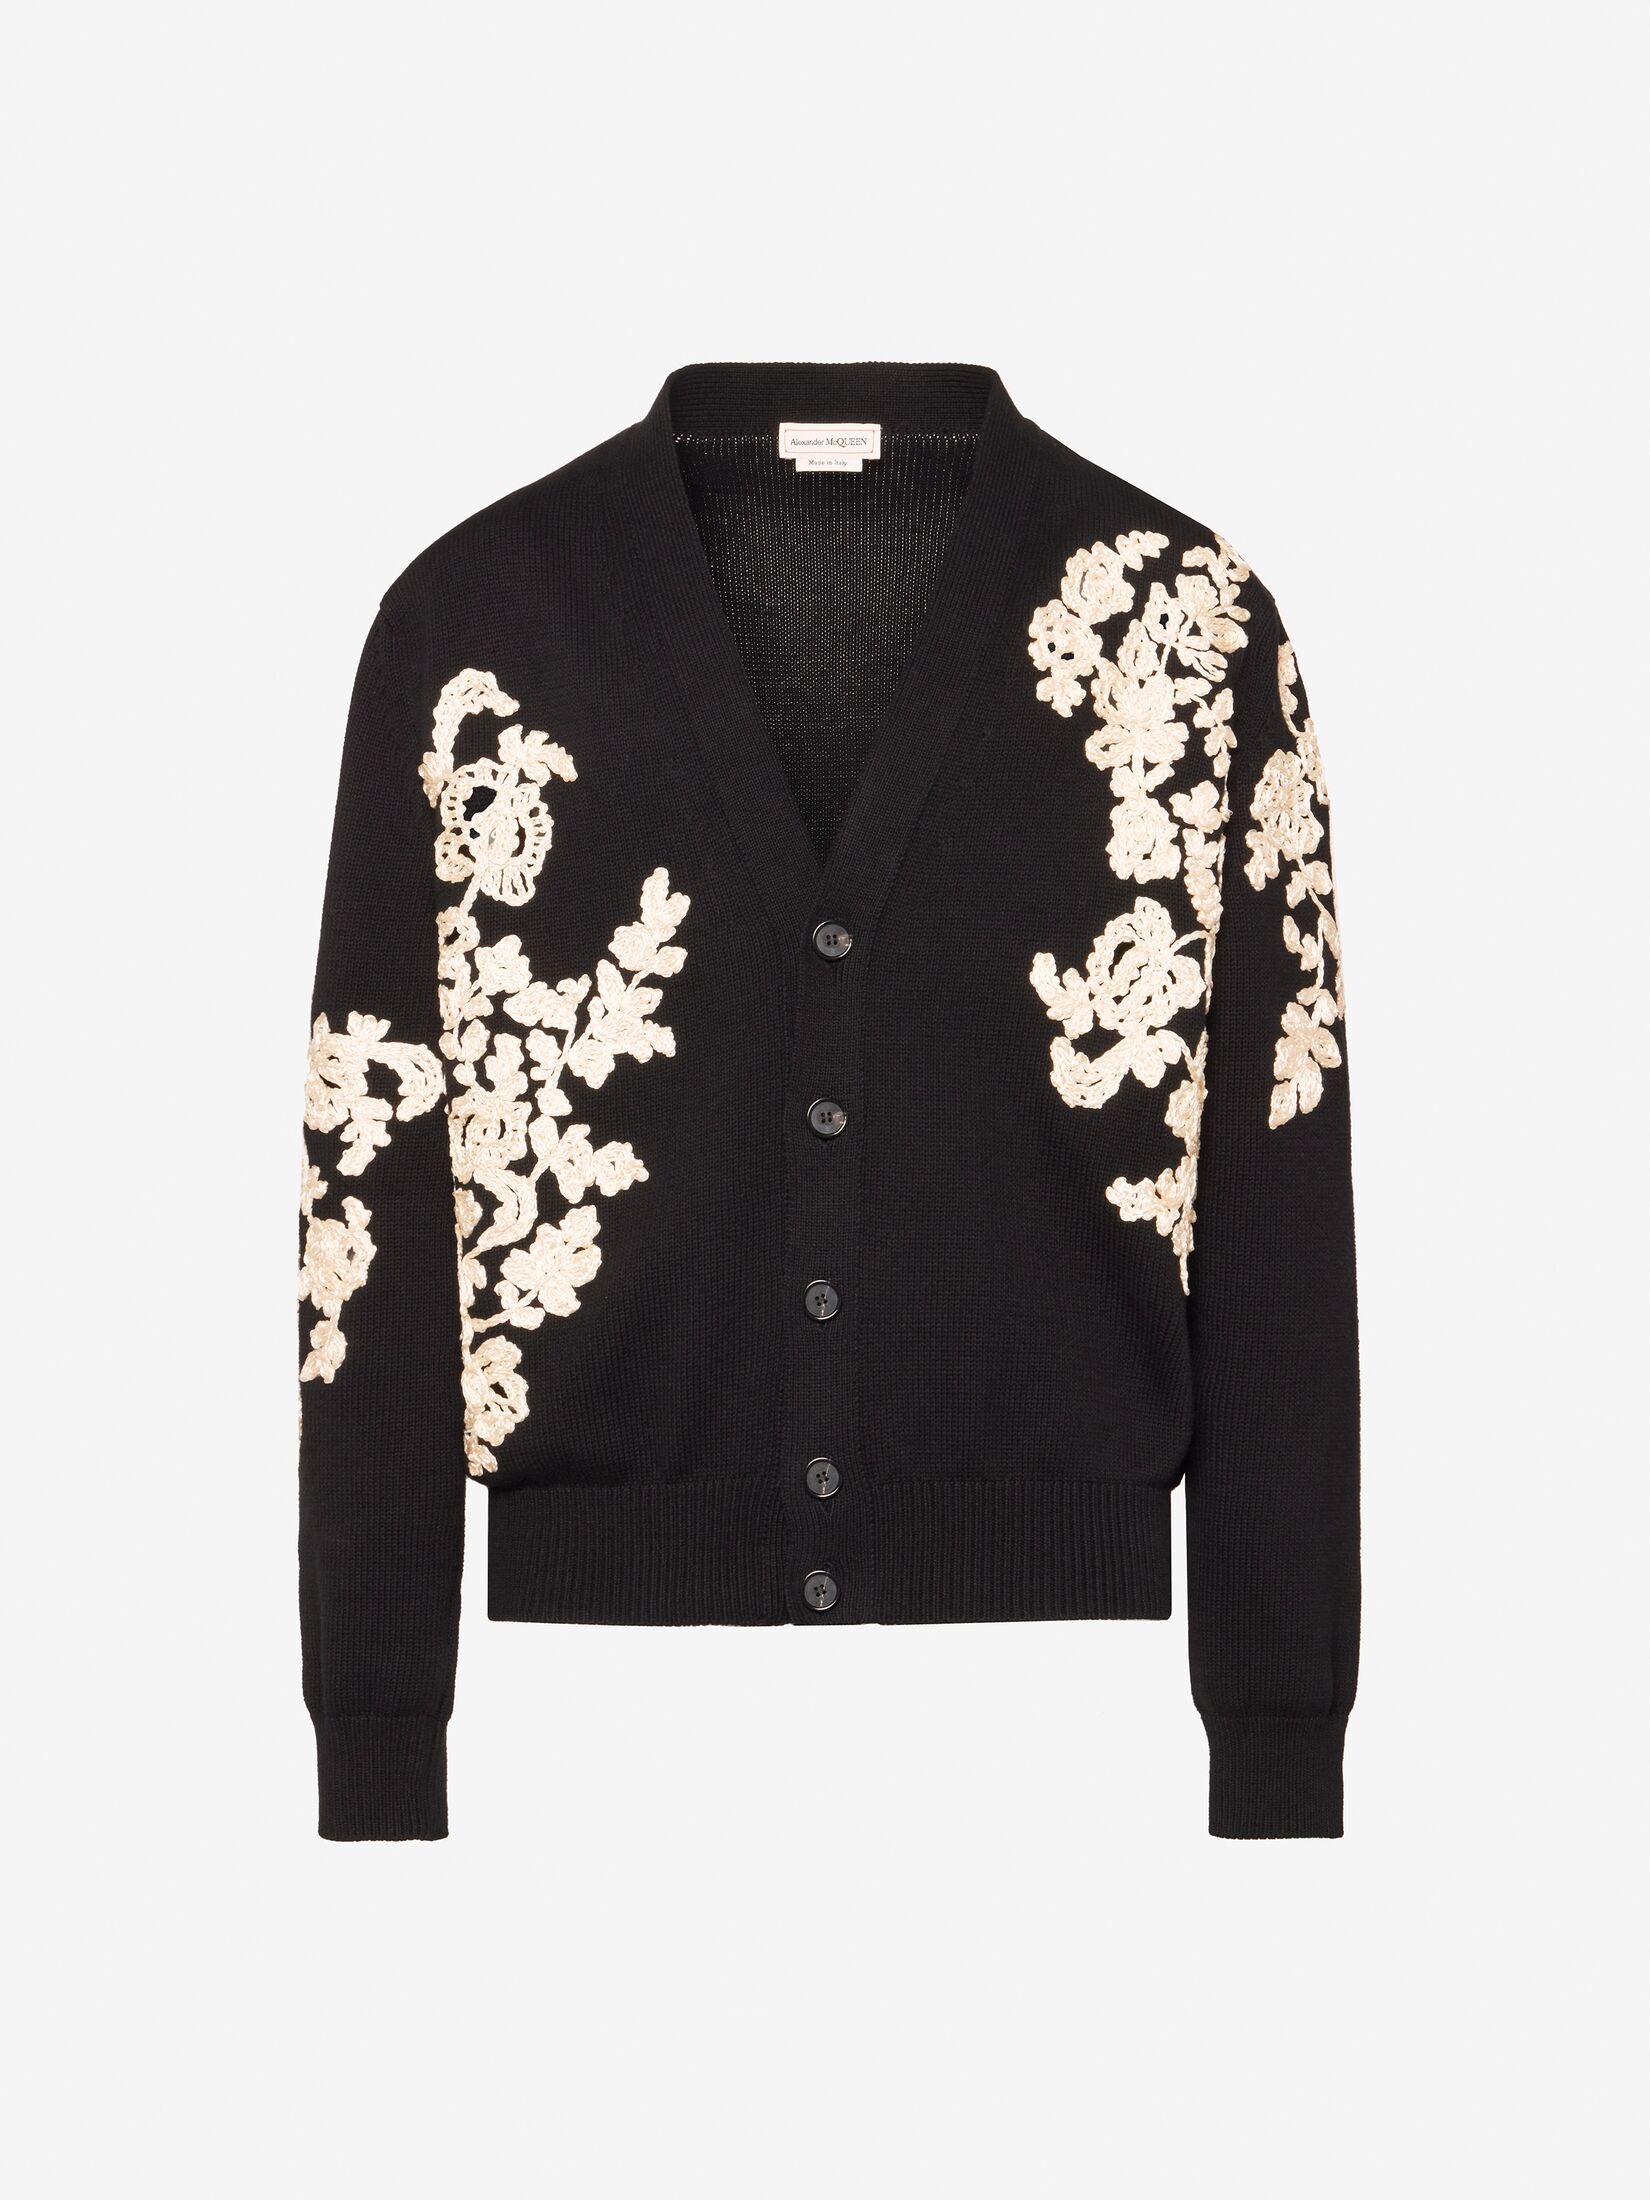 Men's Floral Embroidery Cardigan in Black/ivory - 1